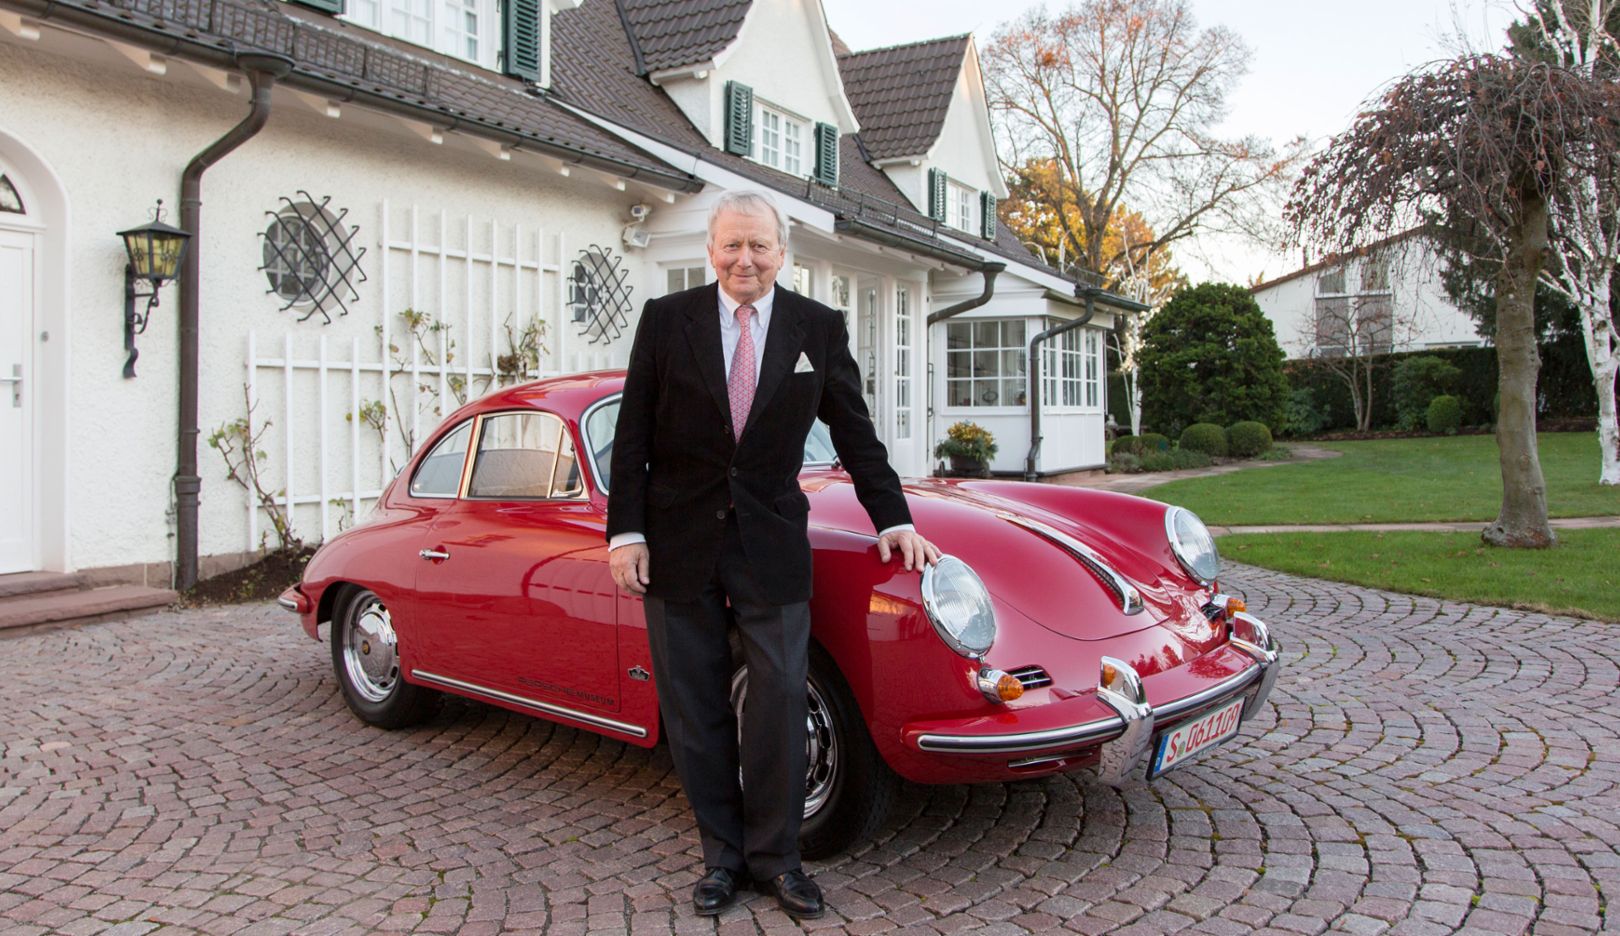 “Wolfgang Porsche is the figure with whom people identify